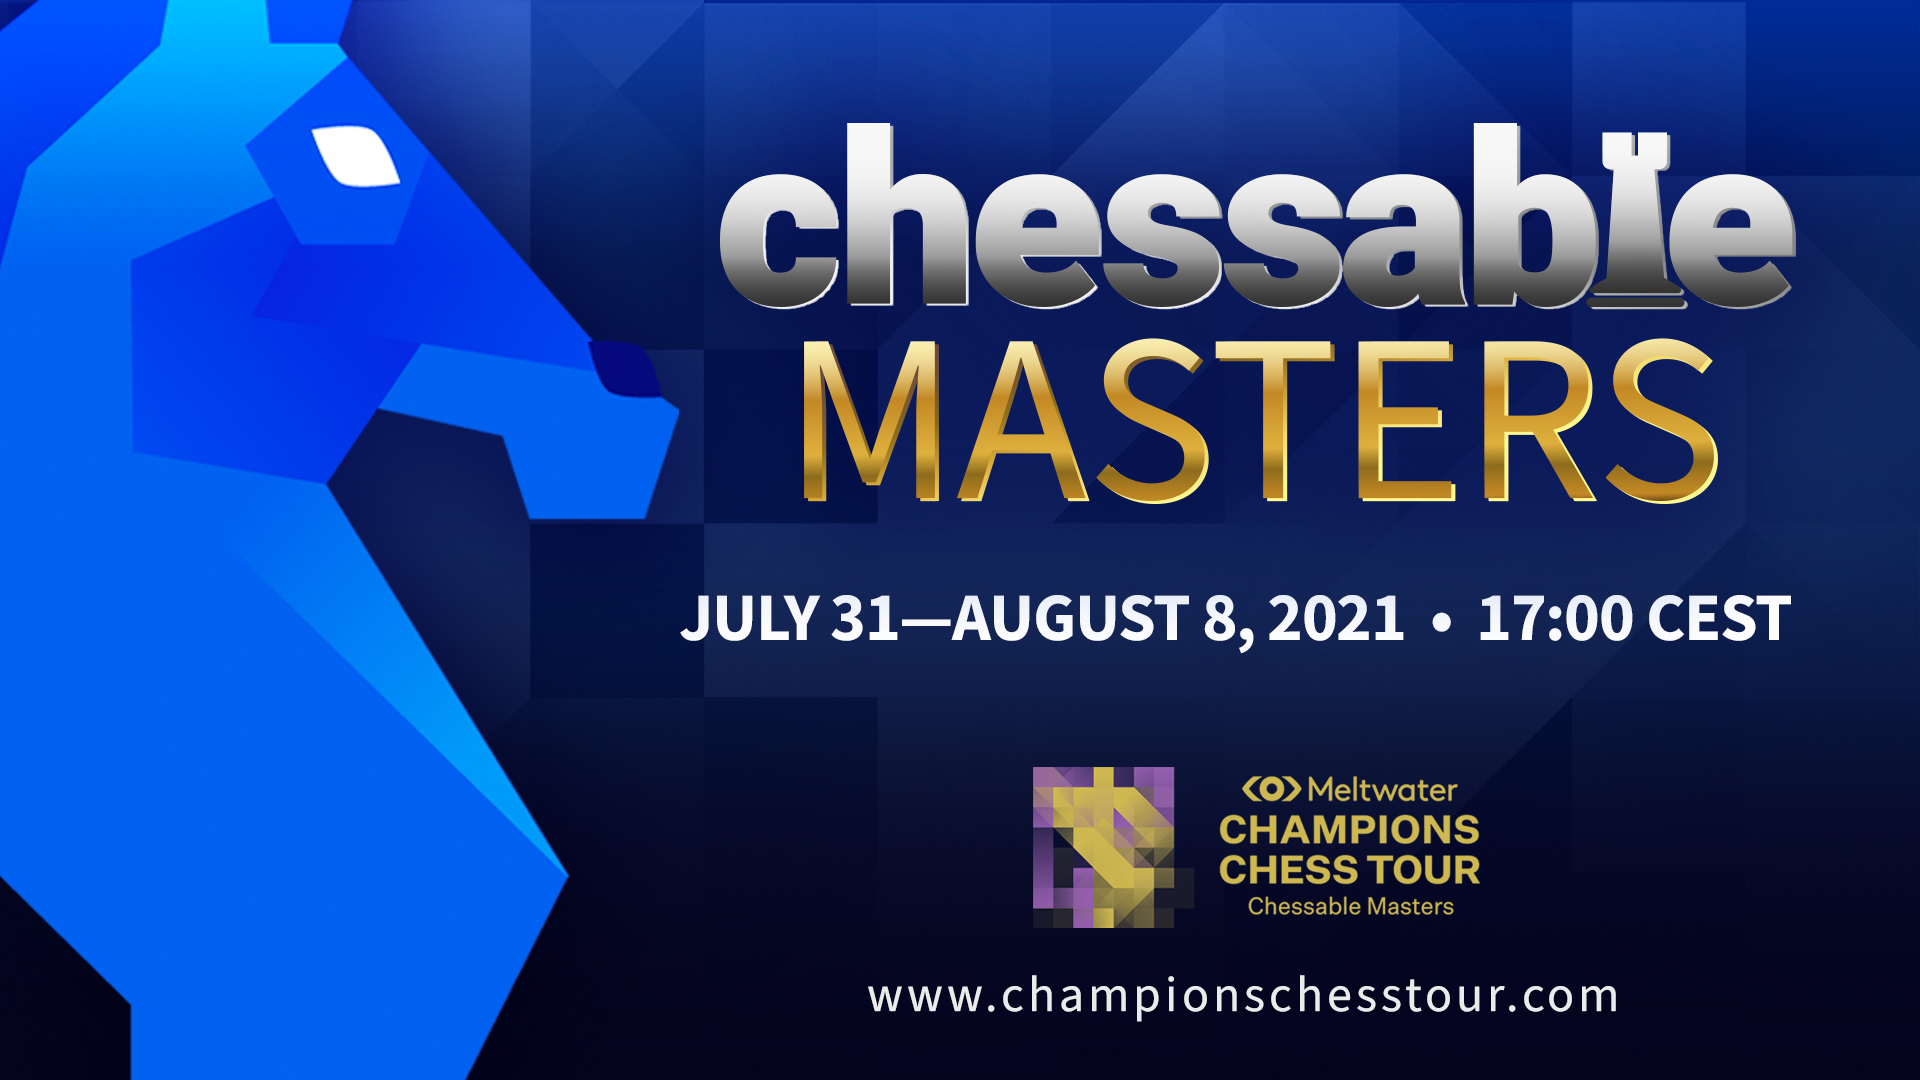 Chessable Masters features Ju Wenjun and Abhimanyu Mishra